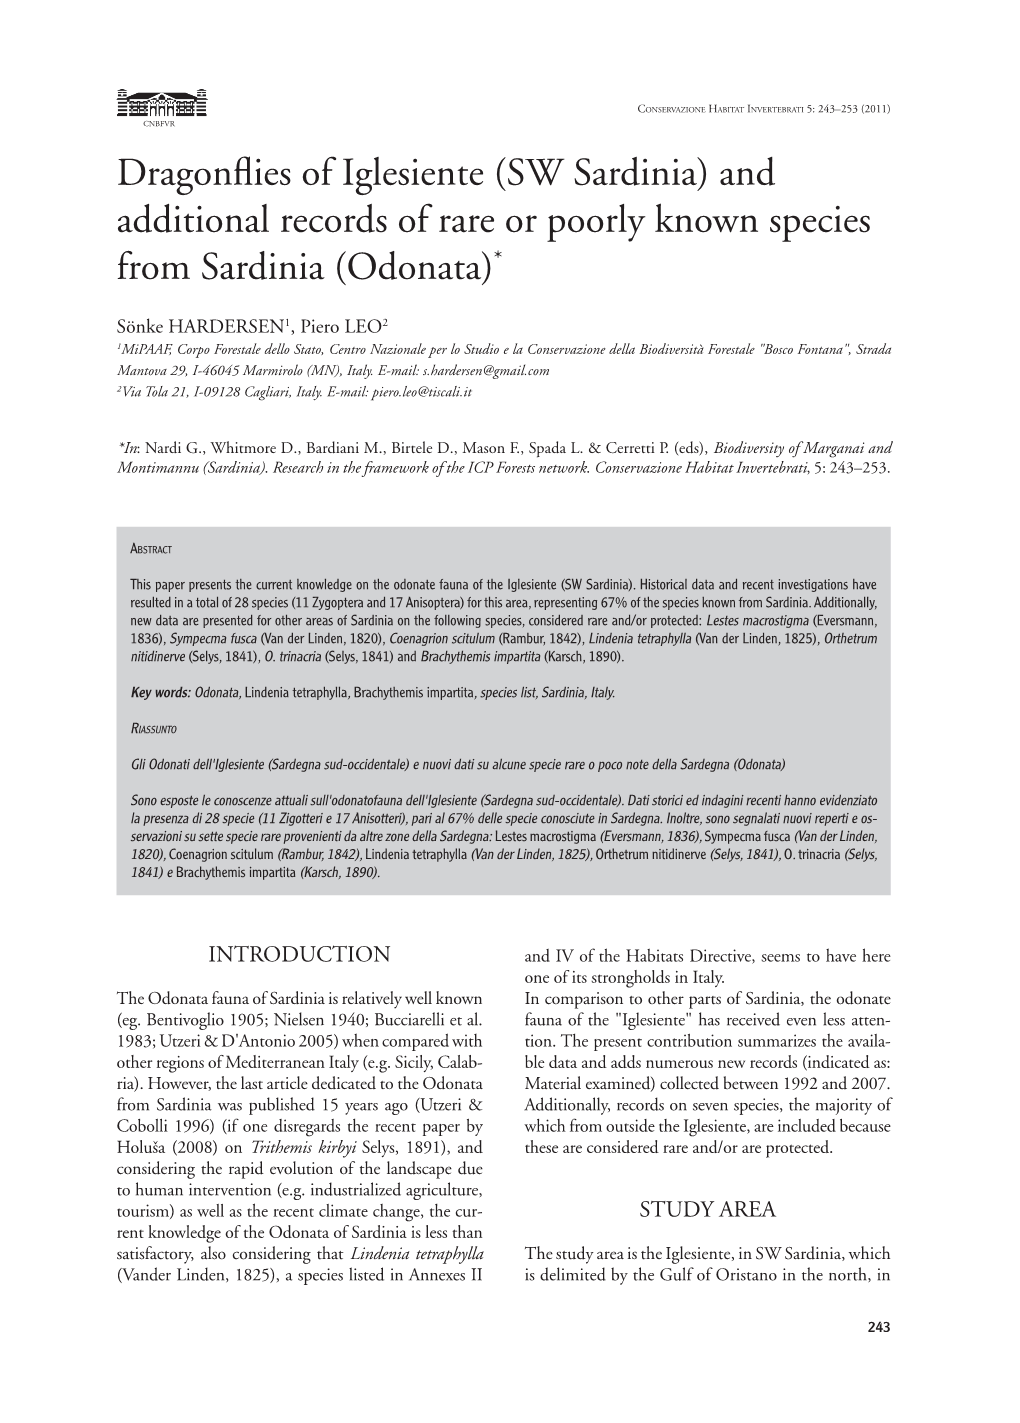 Dragonflies of Iglesiente (SW Sardinia) and Additional Records of Rare Or Poorly Known Species from Sardinia (Odonata)